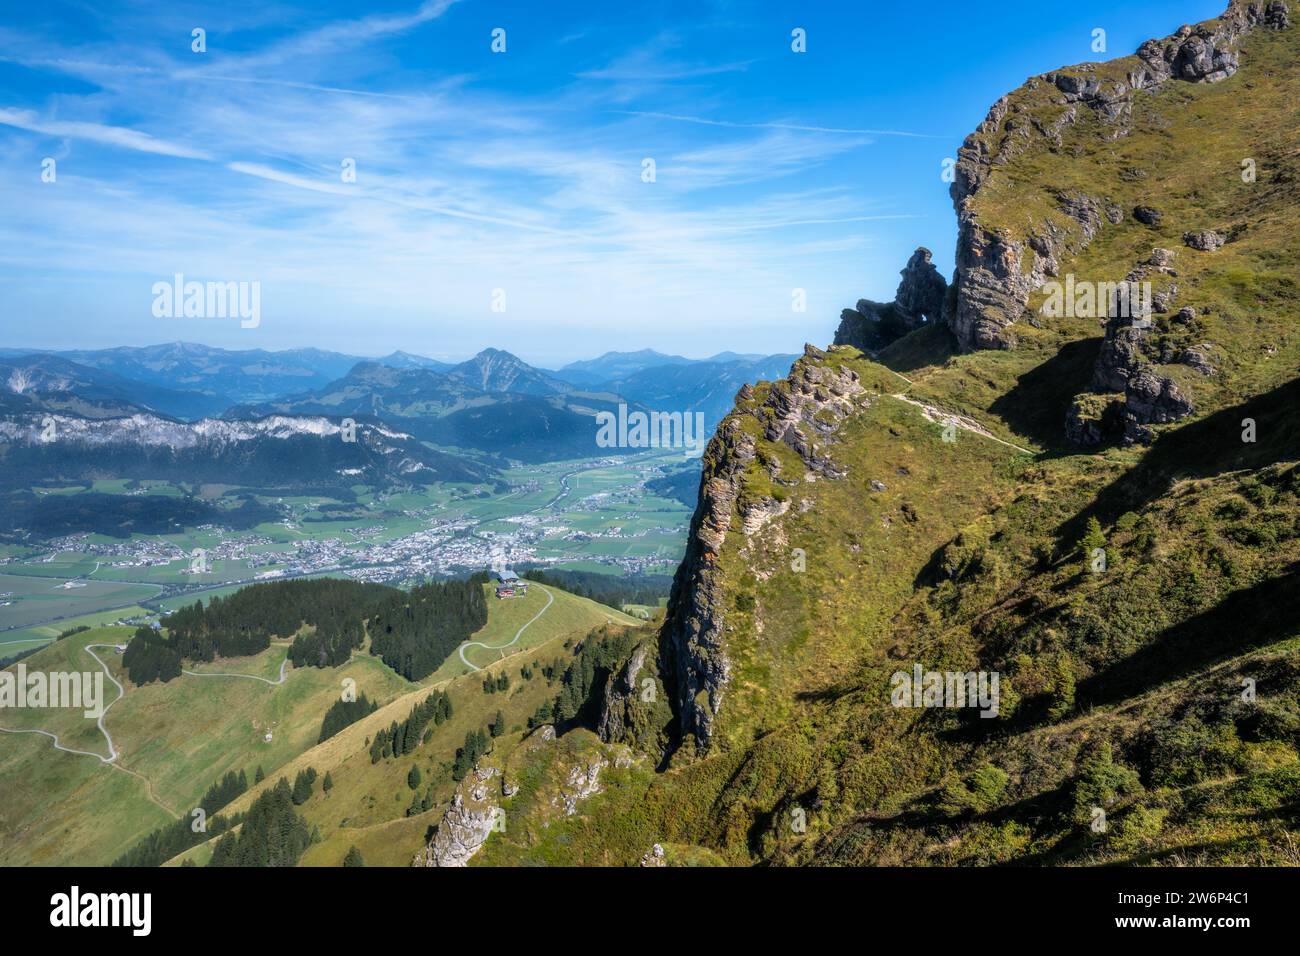 View from the Kitzbüheler Horn mountain in Austria Stock Photo